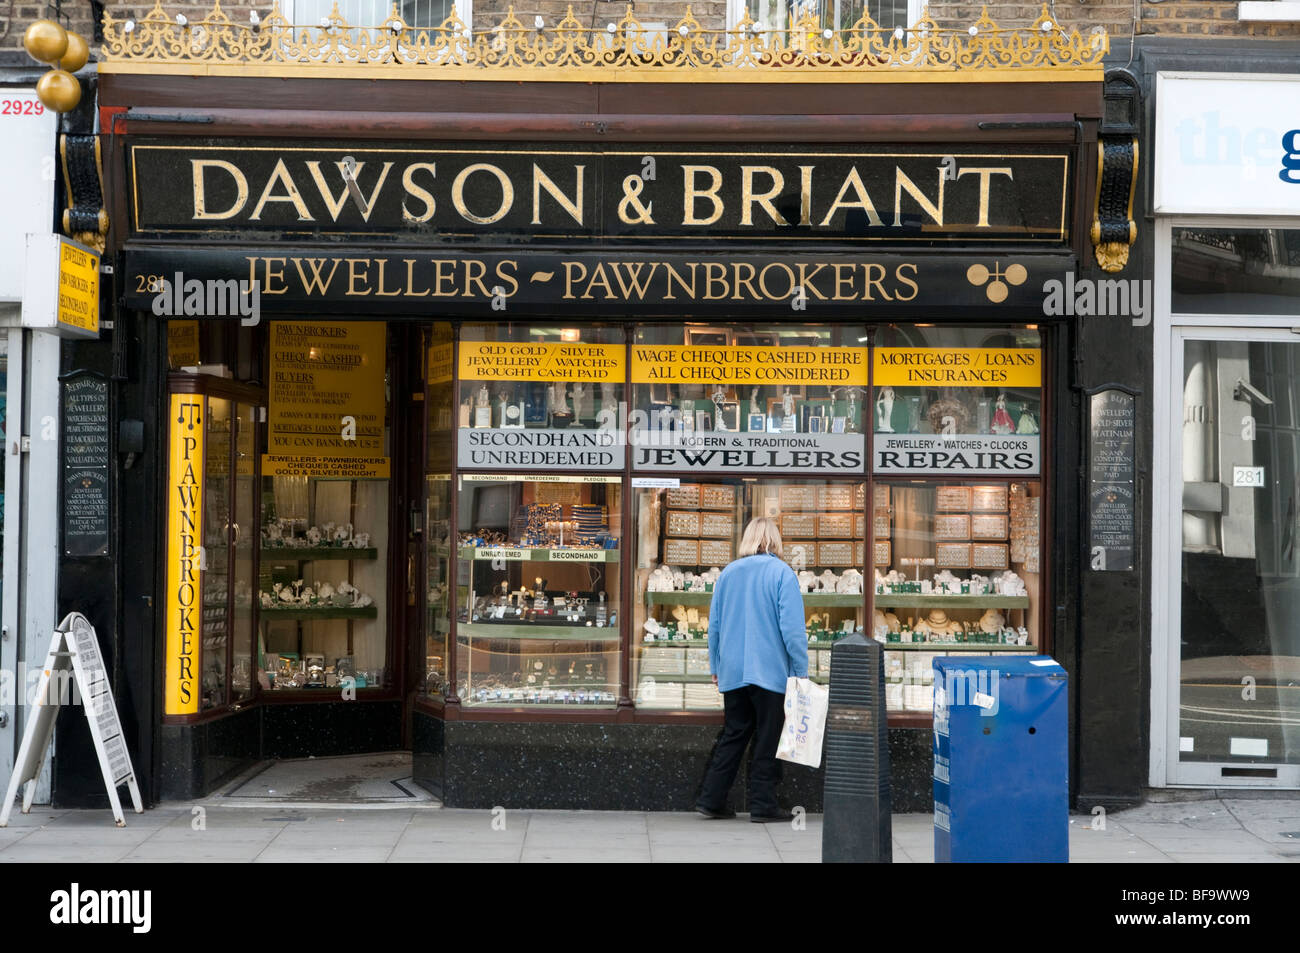 Dawson & Briant jewellers and pawnbrokers in London, England, UK Stock Photo